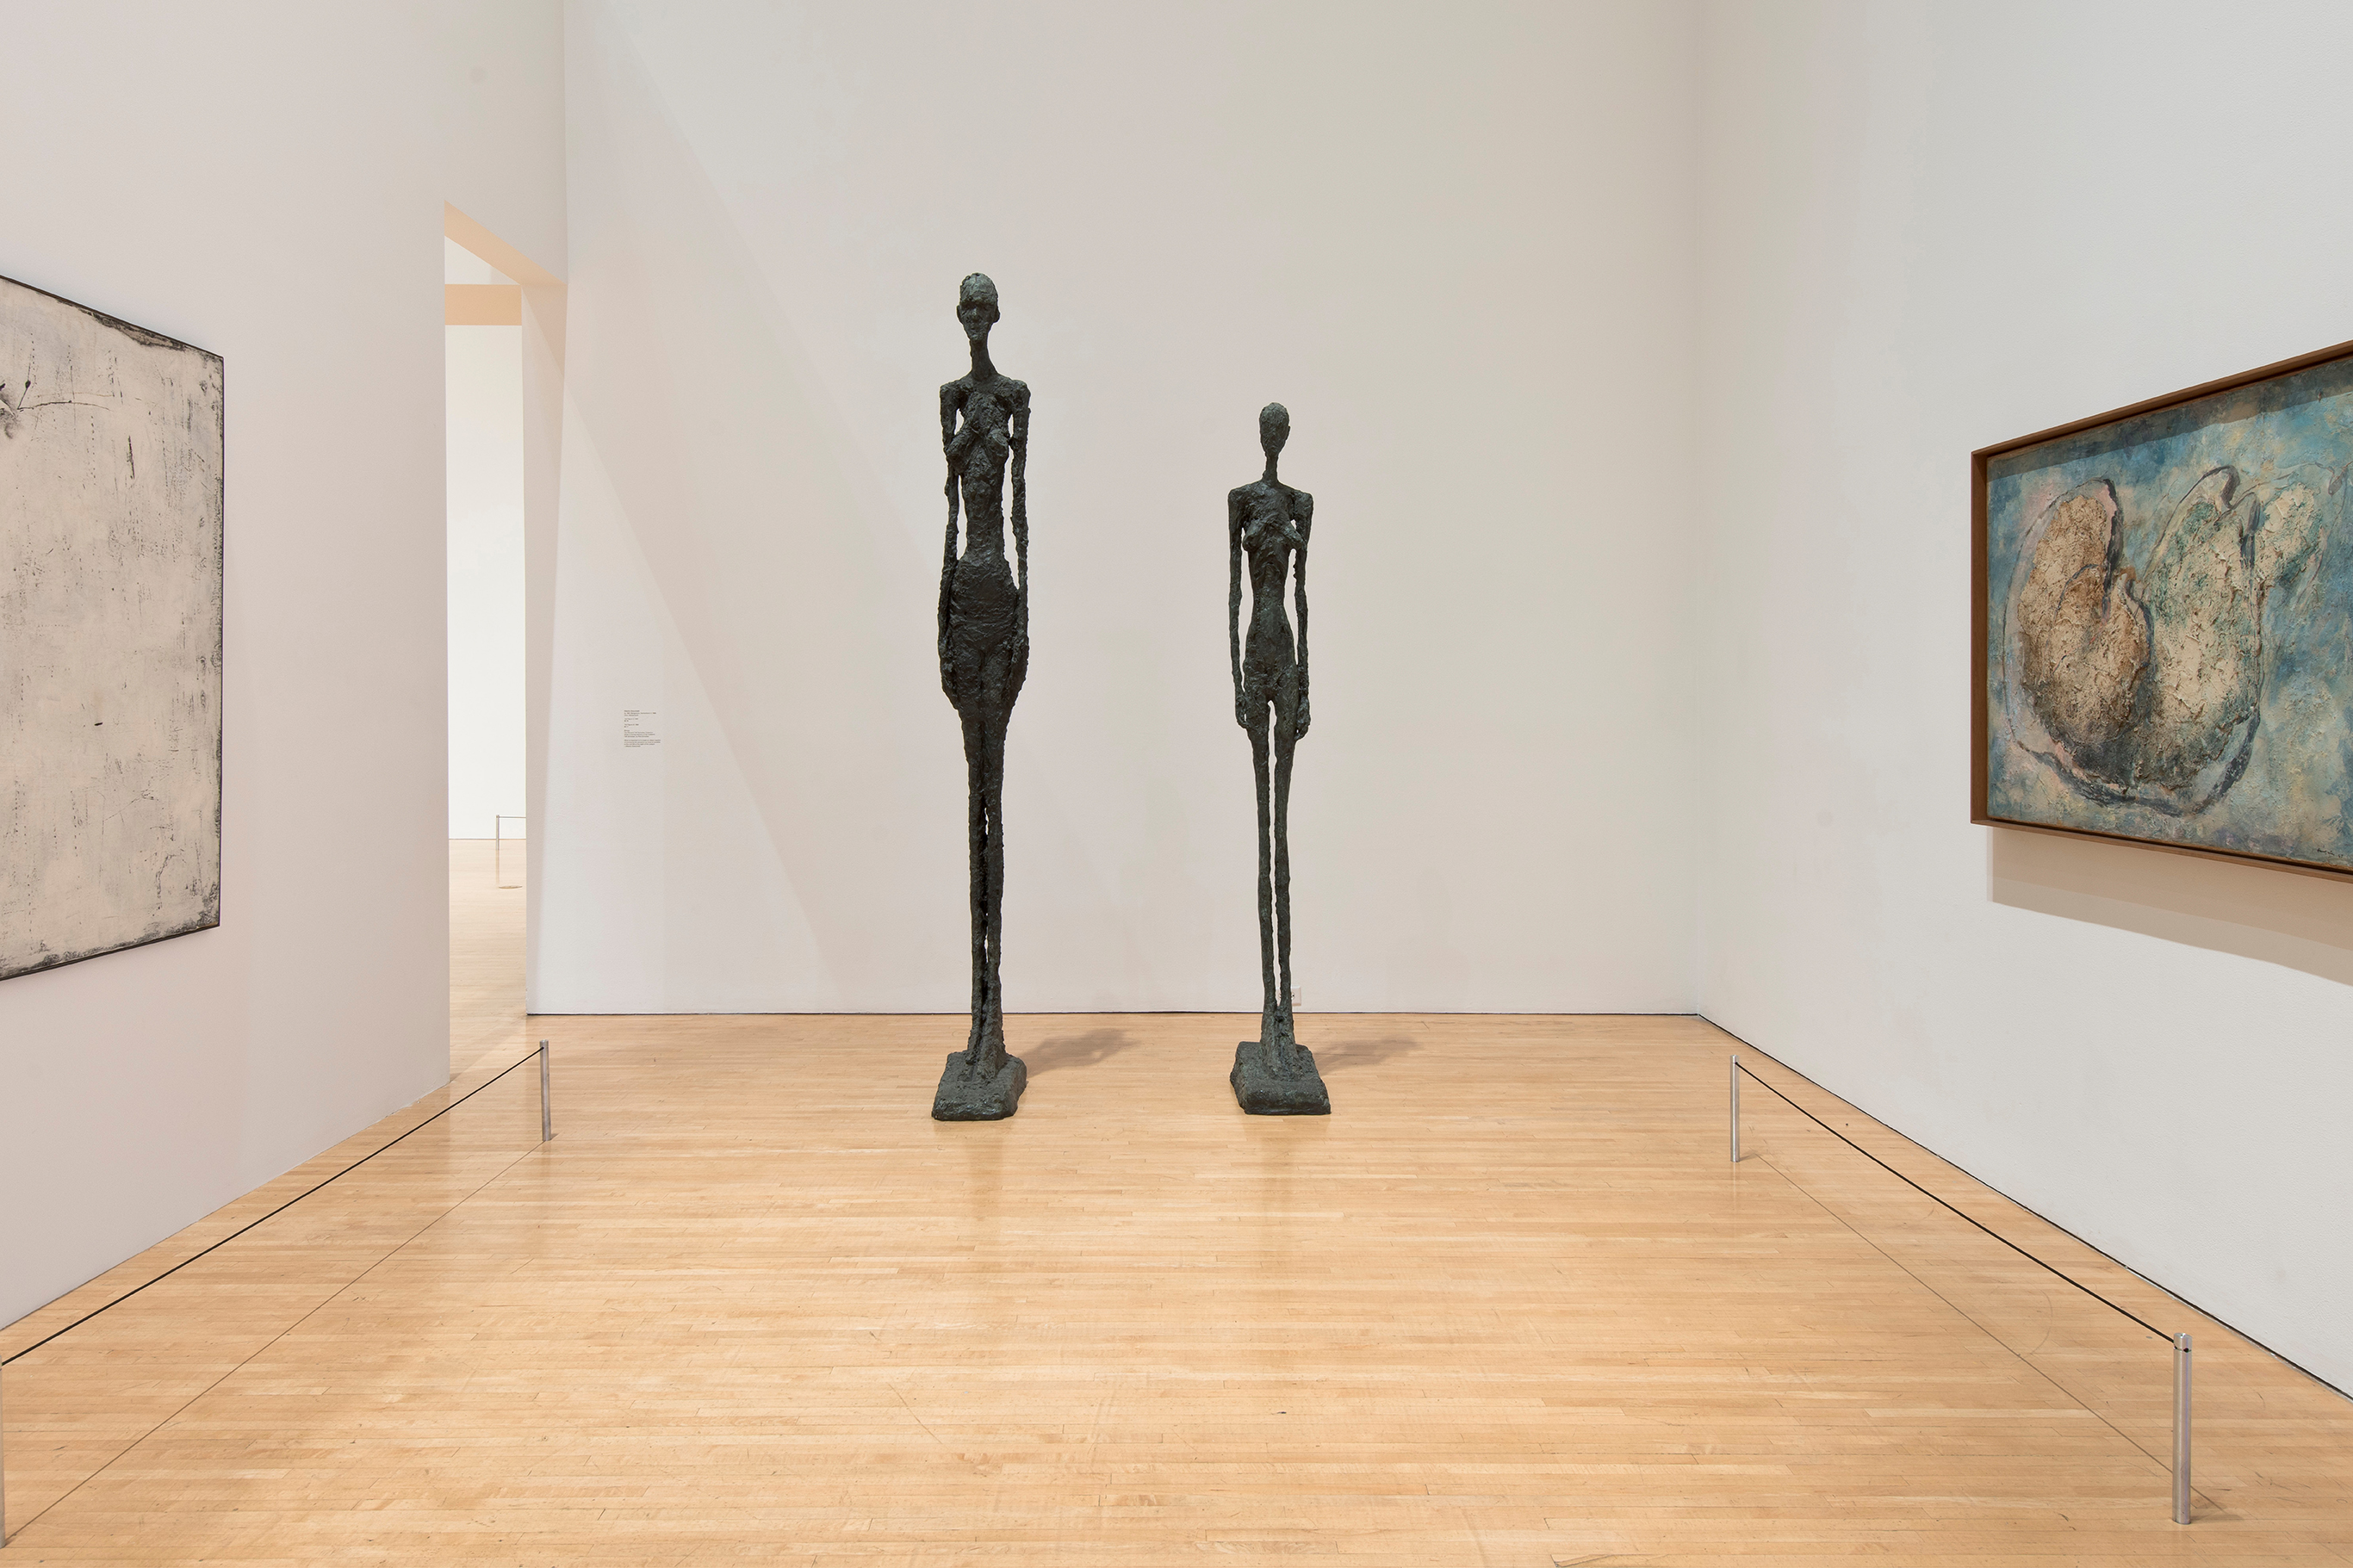 Tall Figure II and Tall Figure III sculptures by Alberto Giacometti at The Museum of Contemporary Art